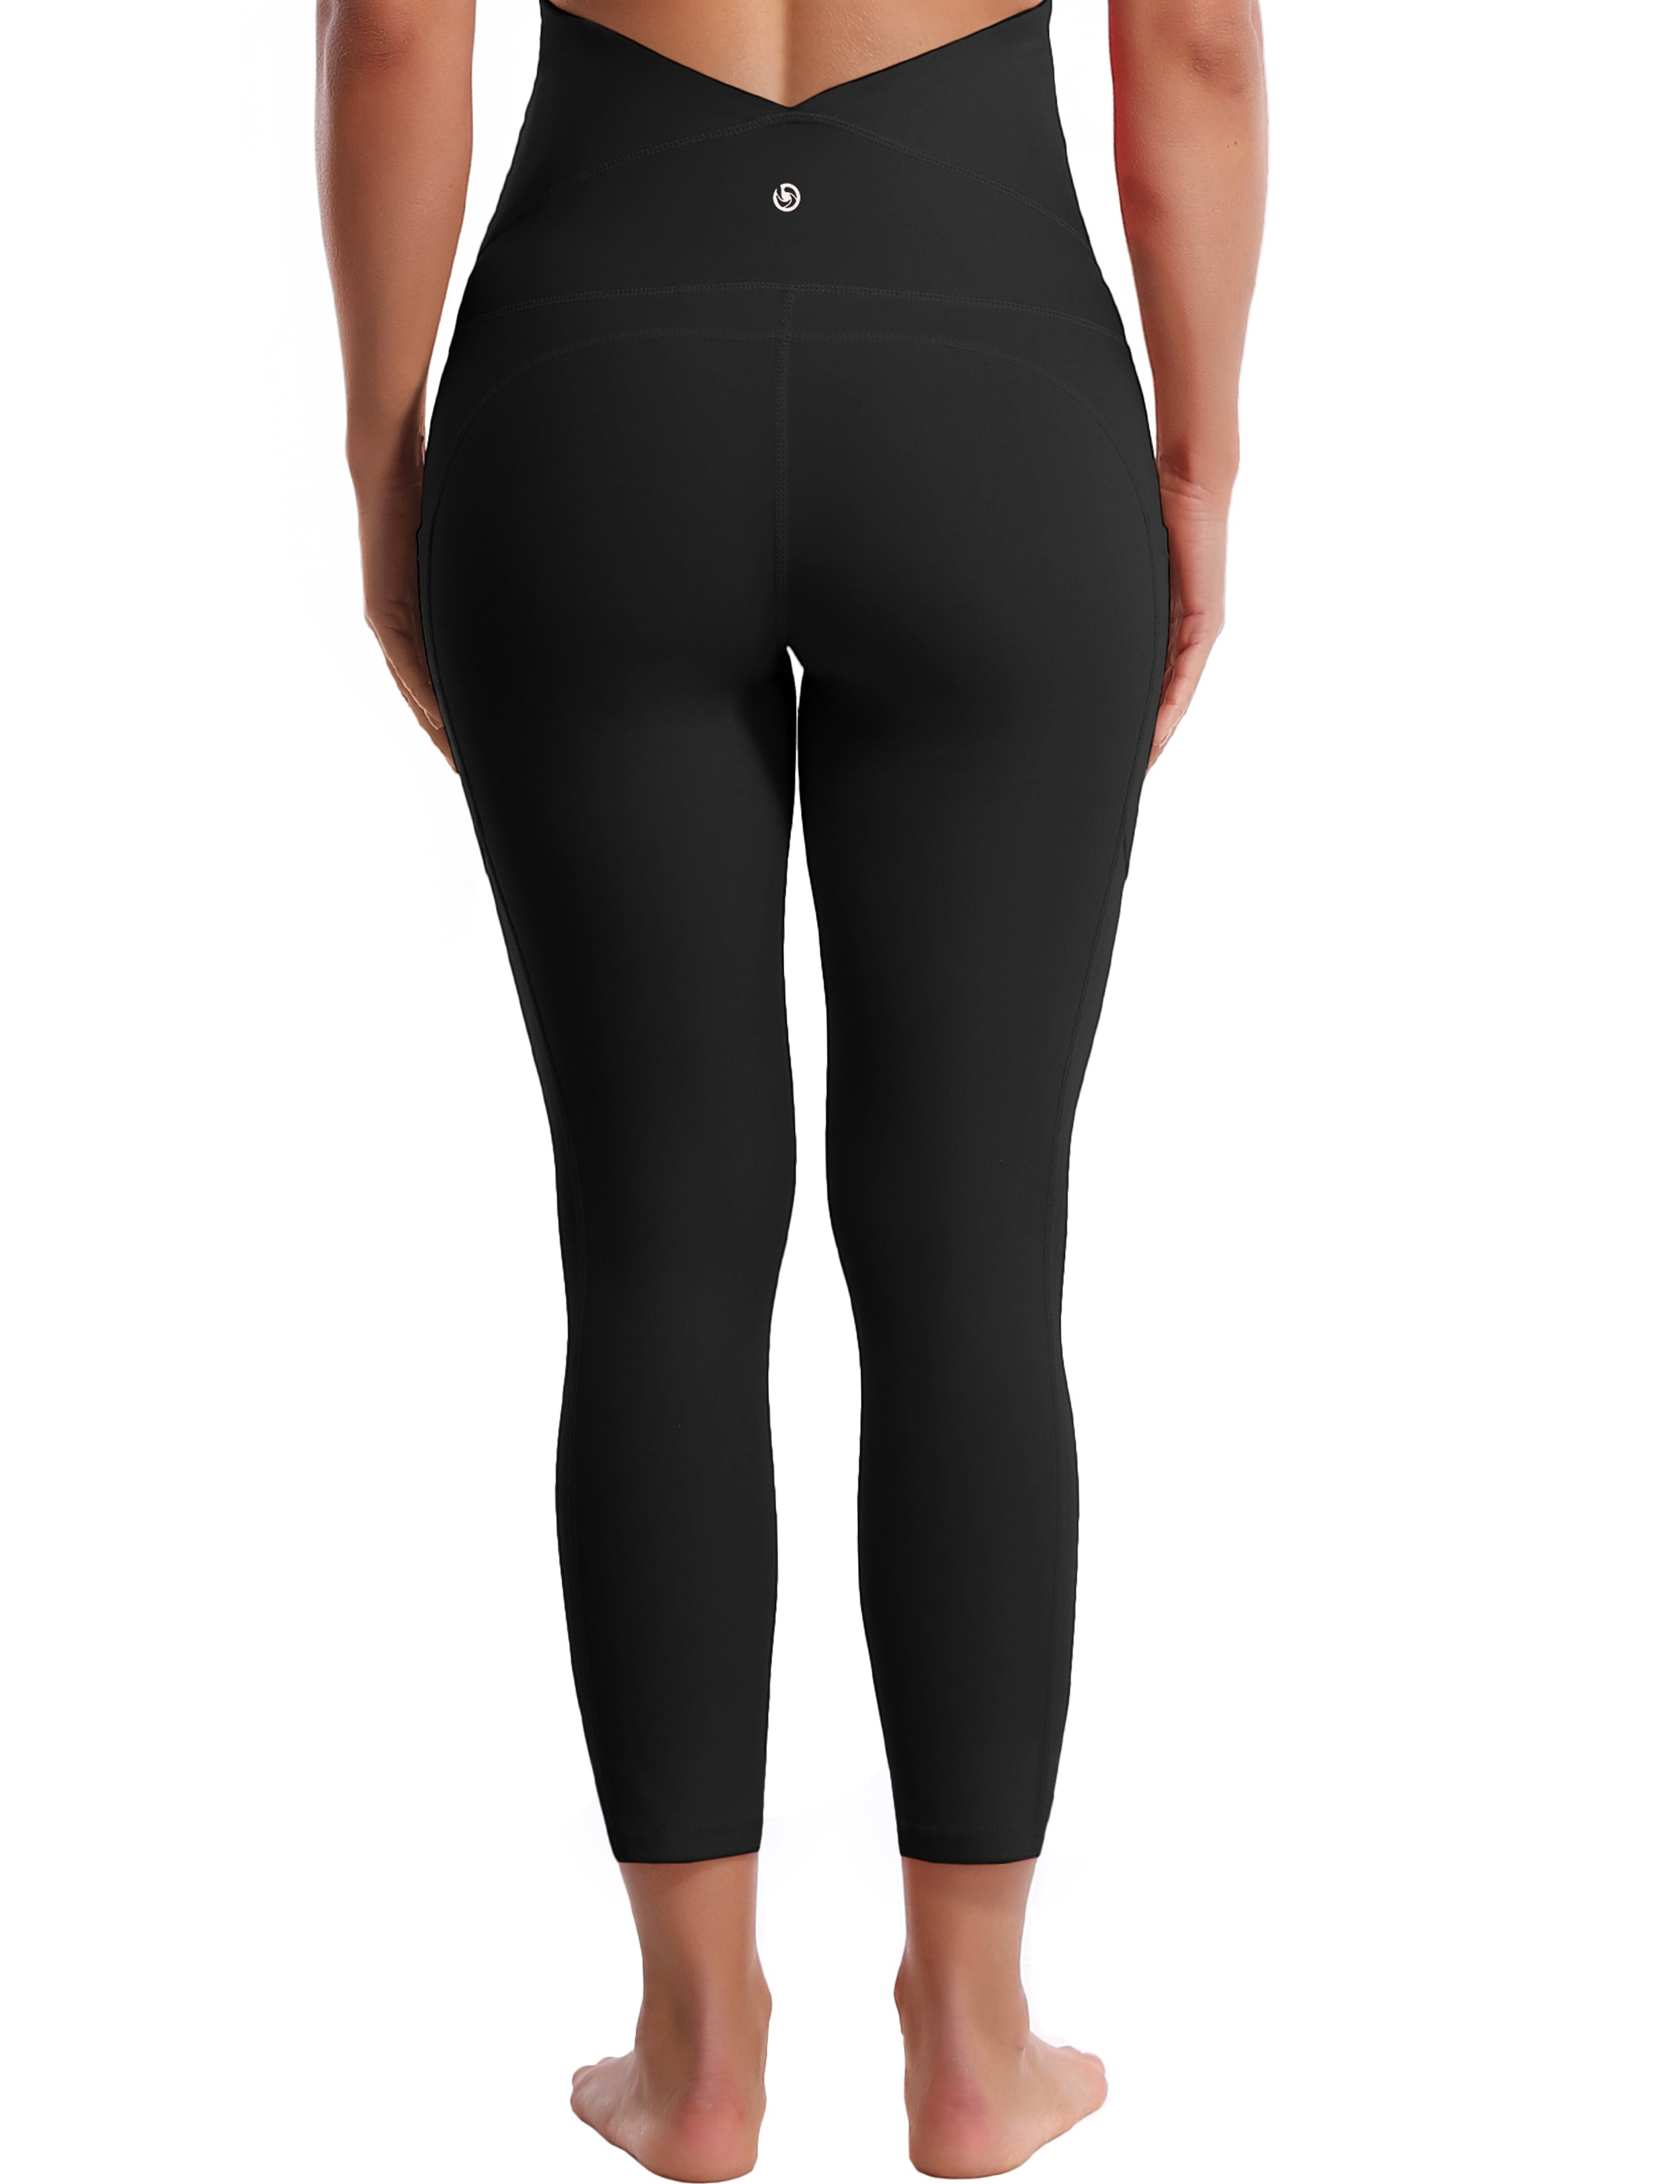 22" Side Pockets Maternity Yoga Pants black 87%Nylon/13%Spandex Softest-ever fabric High elasticity 4-way stretch Fabric doesn't attract lint easily No see-through Moisture-wicking Machine wash